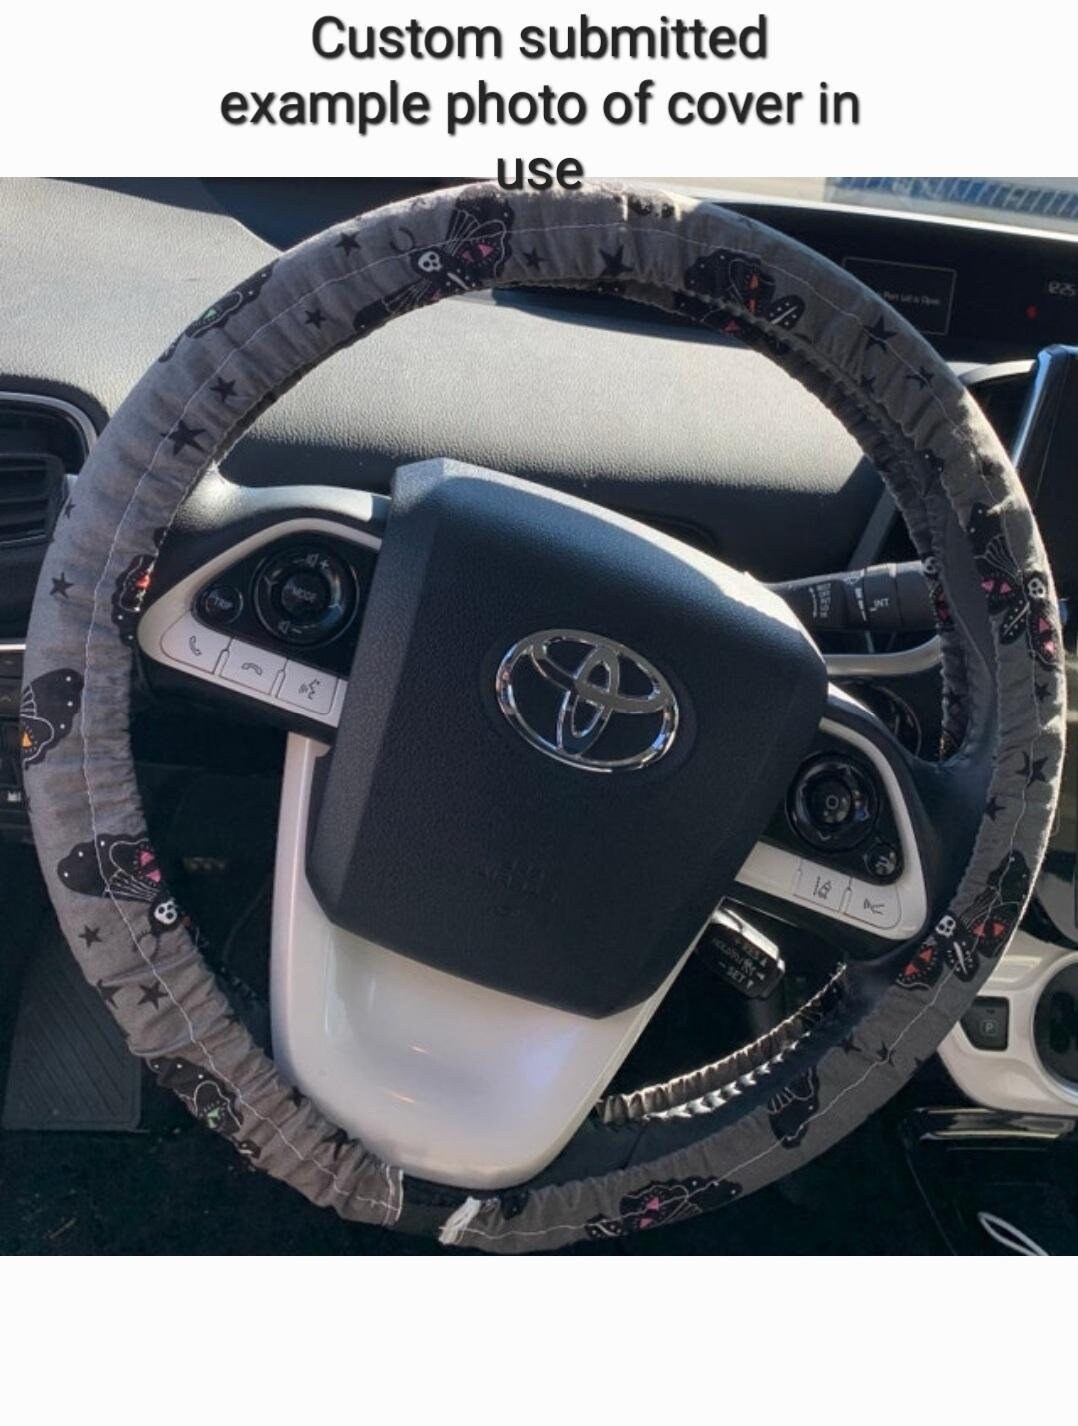 Up Steering Wheel Cover made with Licensed Disney Fabric, Handmade